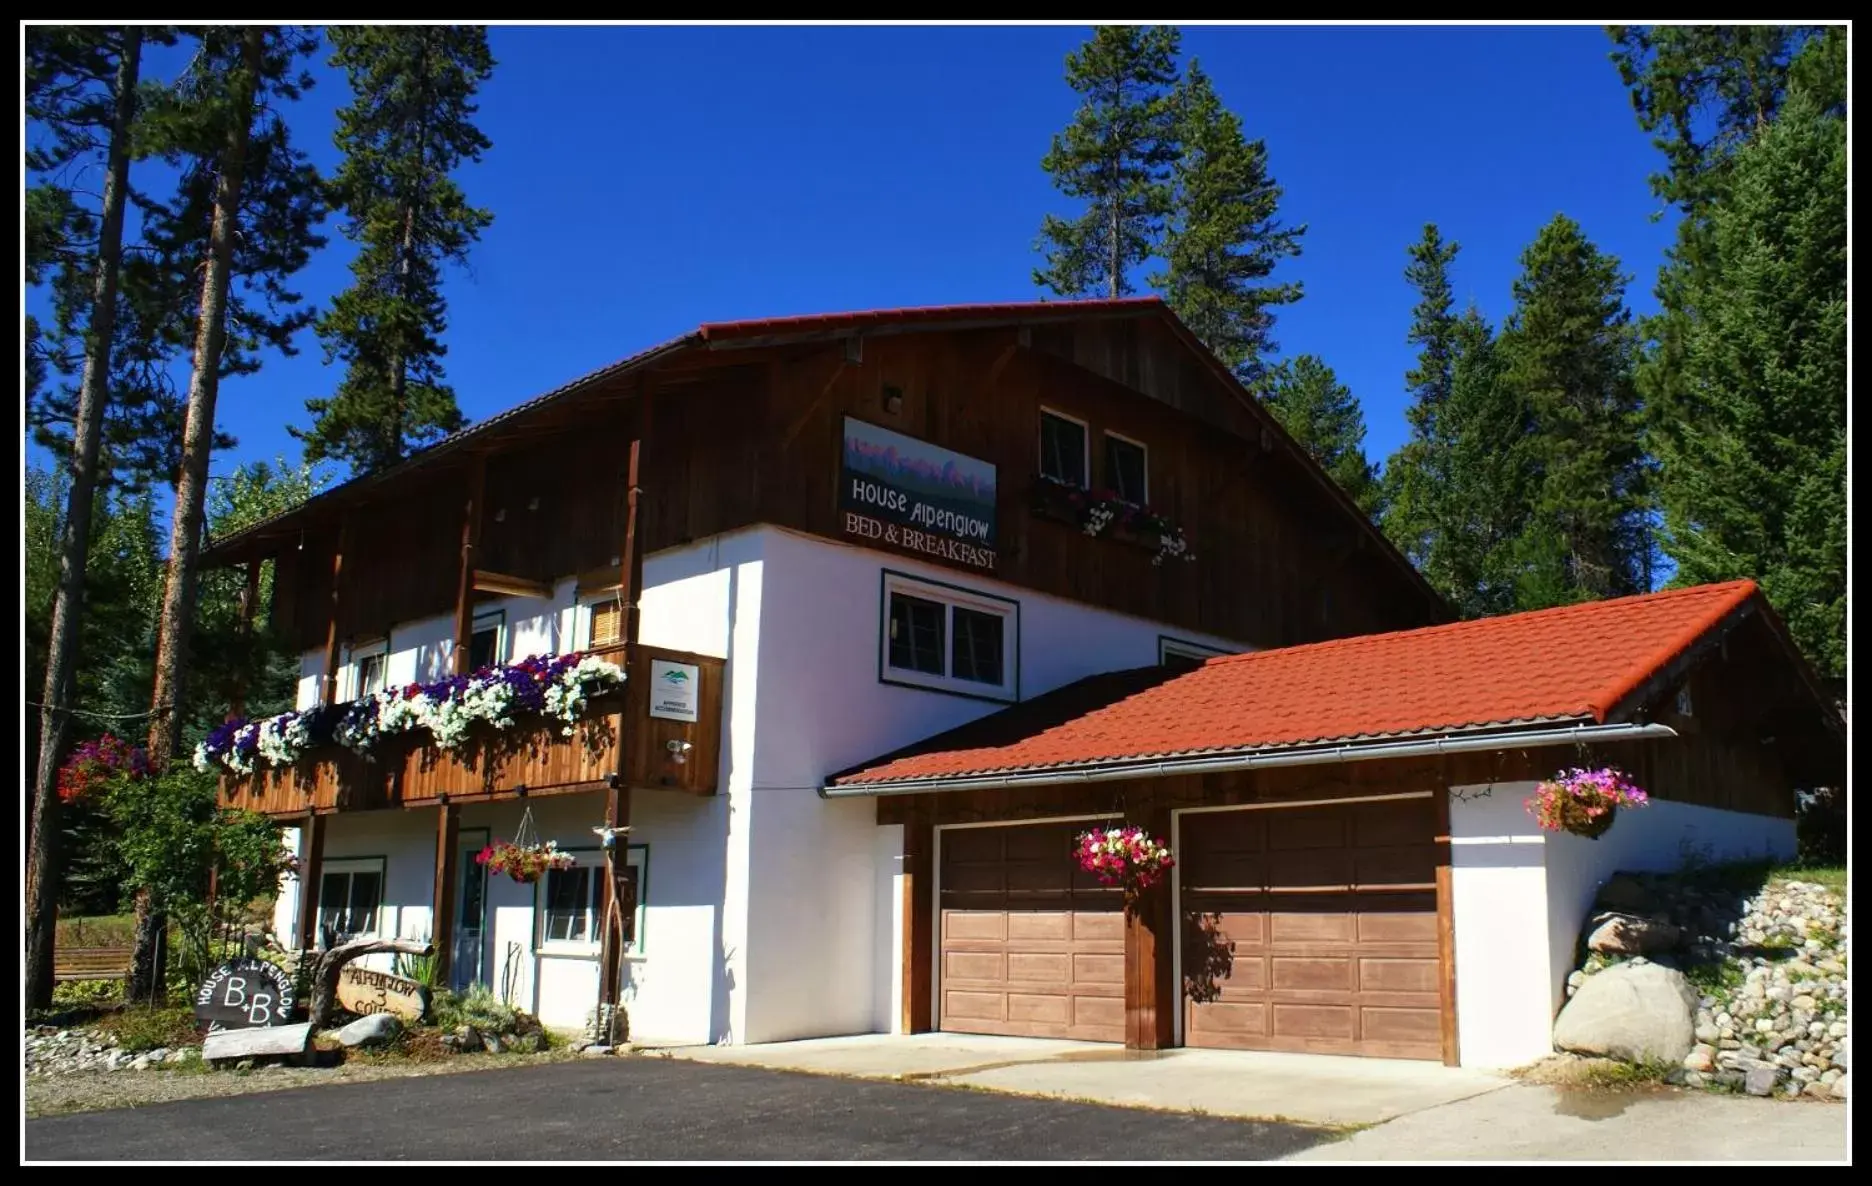 Property Building in Alpenglow Bed and Breakfast